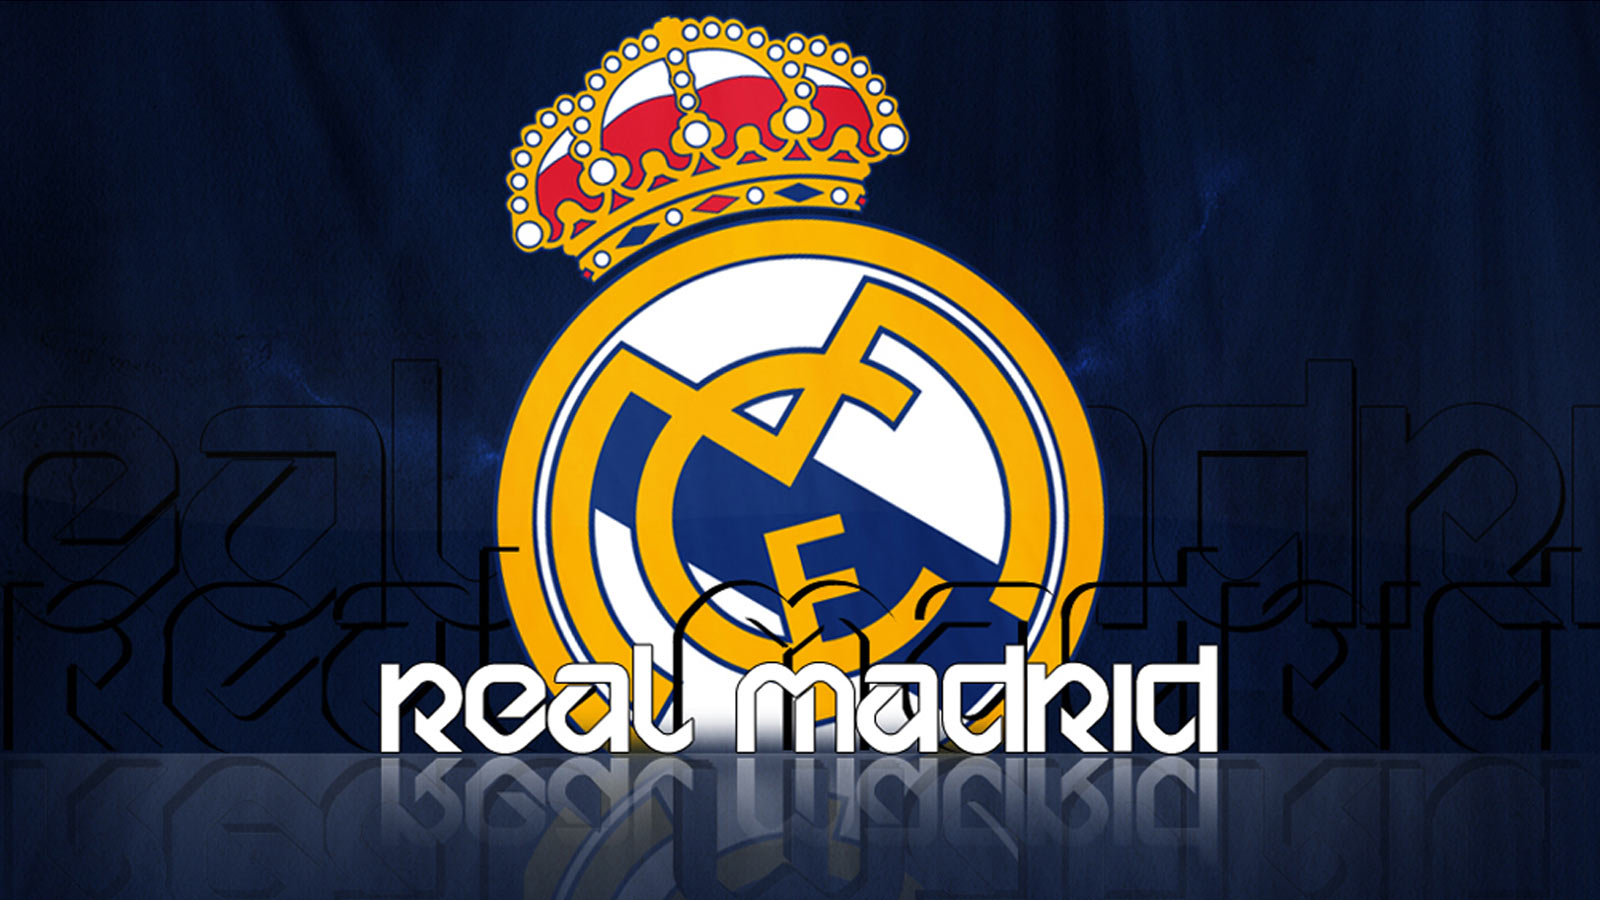 Real Madrid FC New HD Wallpapers 2013-2014 | Football HD Wallpapers